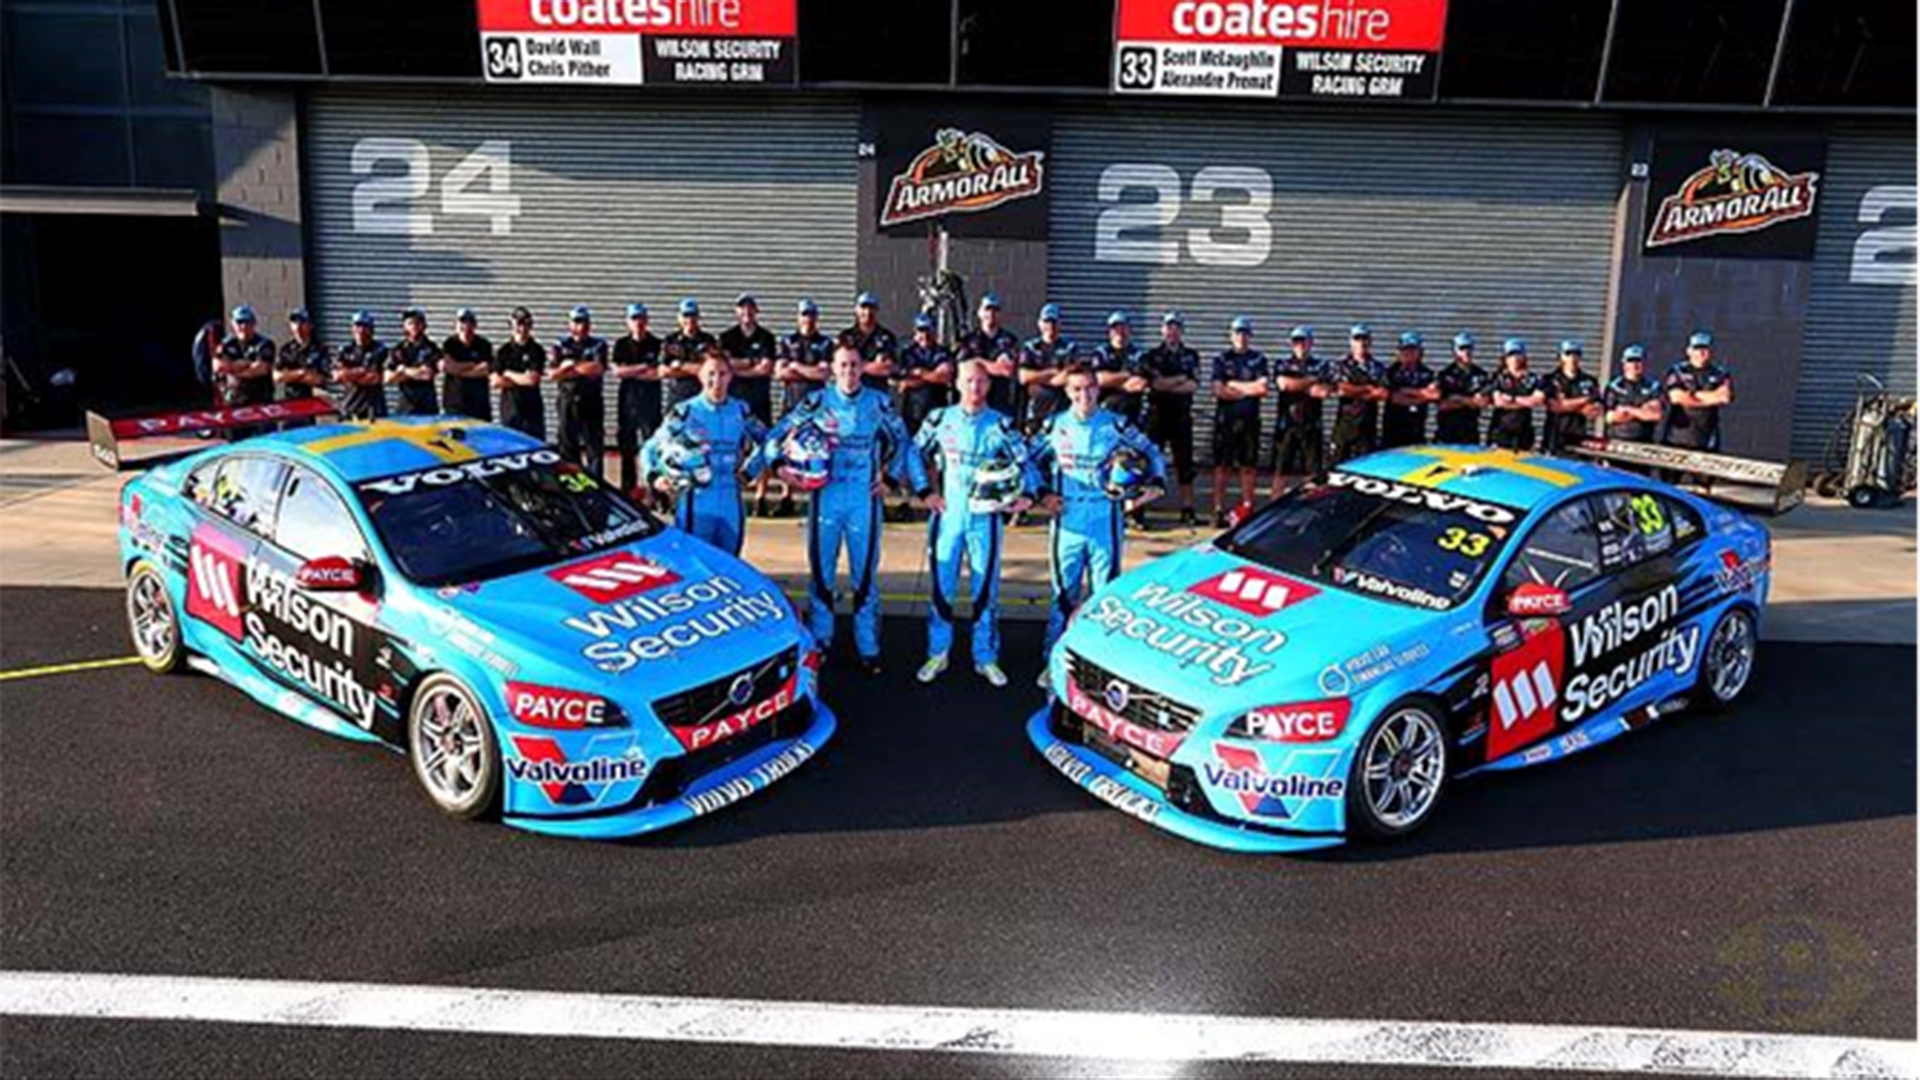 PAYCE teams put in strong performances at Mount Panorama